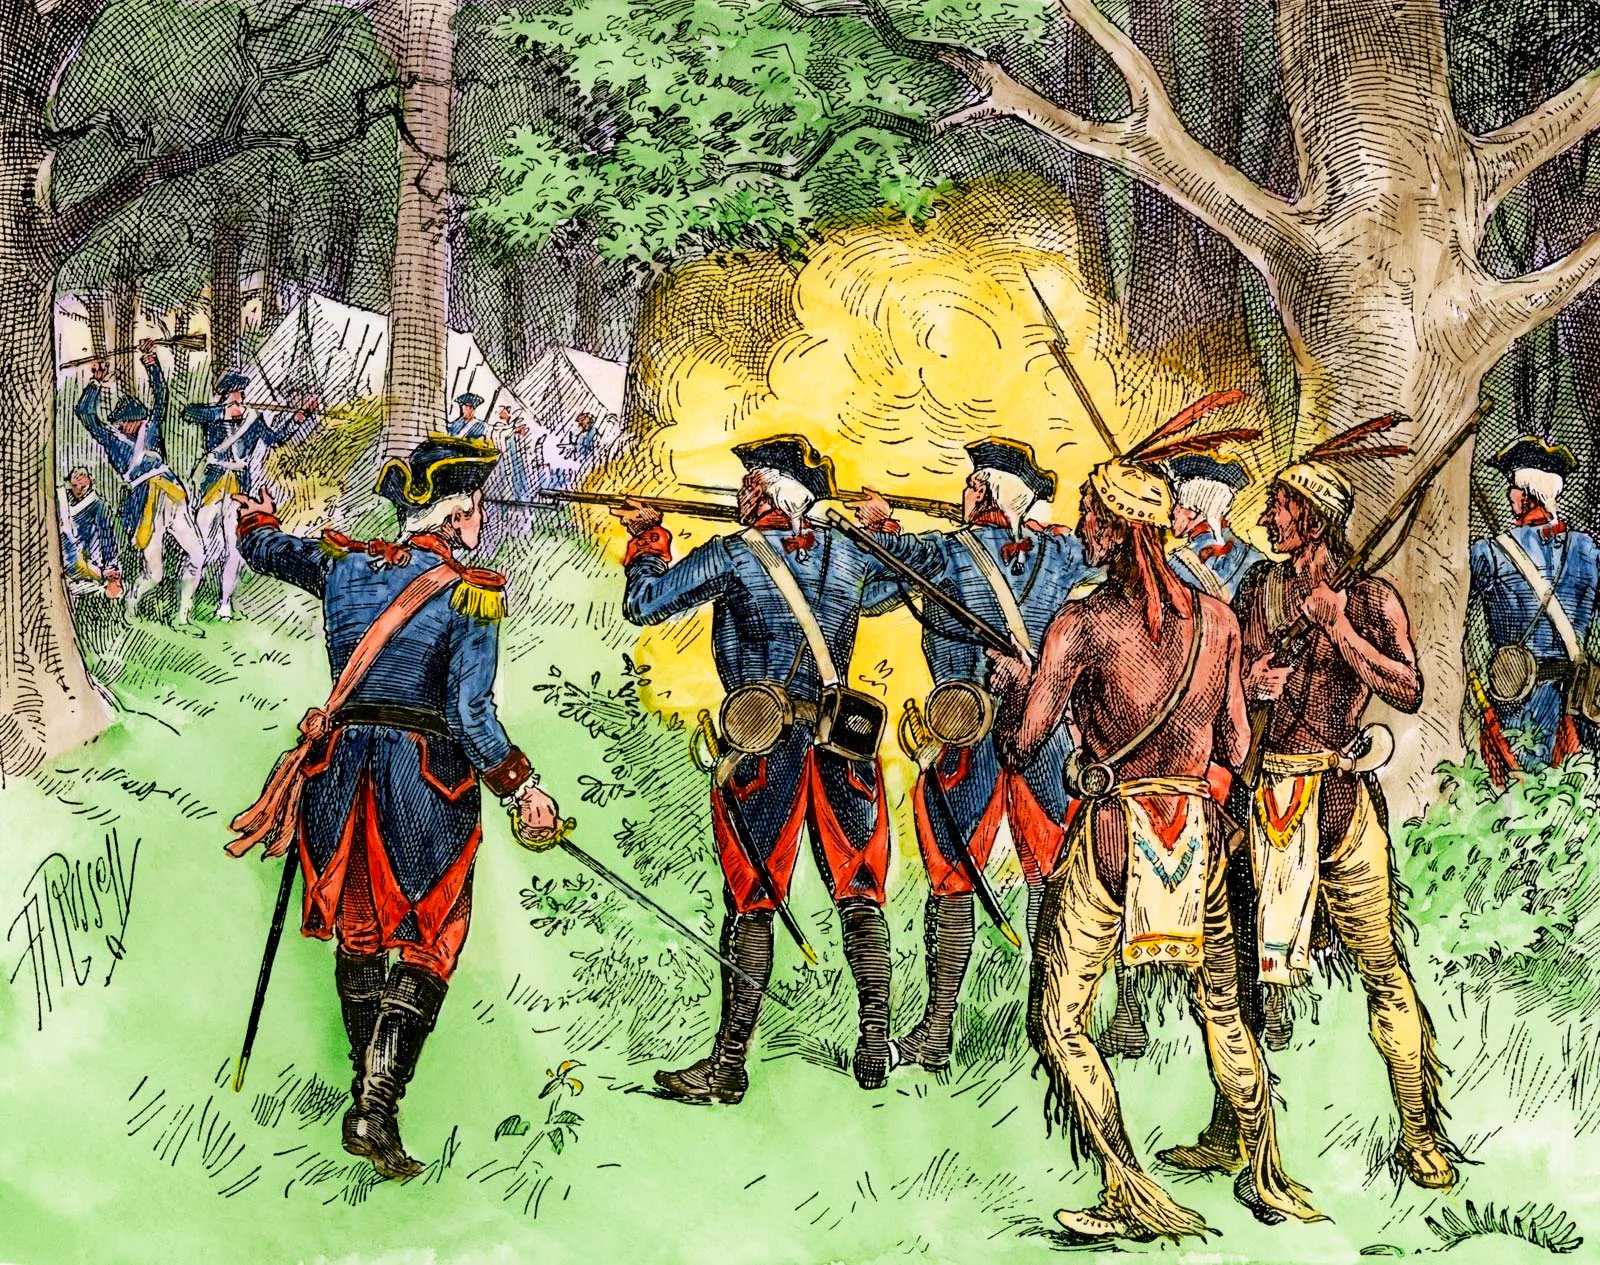 An illustration from the French and Indian War, showing a scene of collaboration between European soldiers and Native American warriors. The European soldiers, dressed in blue uniforms with red accents and black tricorne hats, are firing their muskets. Beside them, two Native American allies, wearing traditional clothing with feathered headbands, are poised with weapons ready. They are all in a forest setting, indicative of the guerilla-style warfare common in the conflict. The scene captures the alliance between French troops and various Native American tribes during the war, which was part of the larger Seven Years' War.